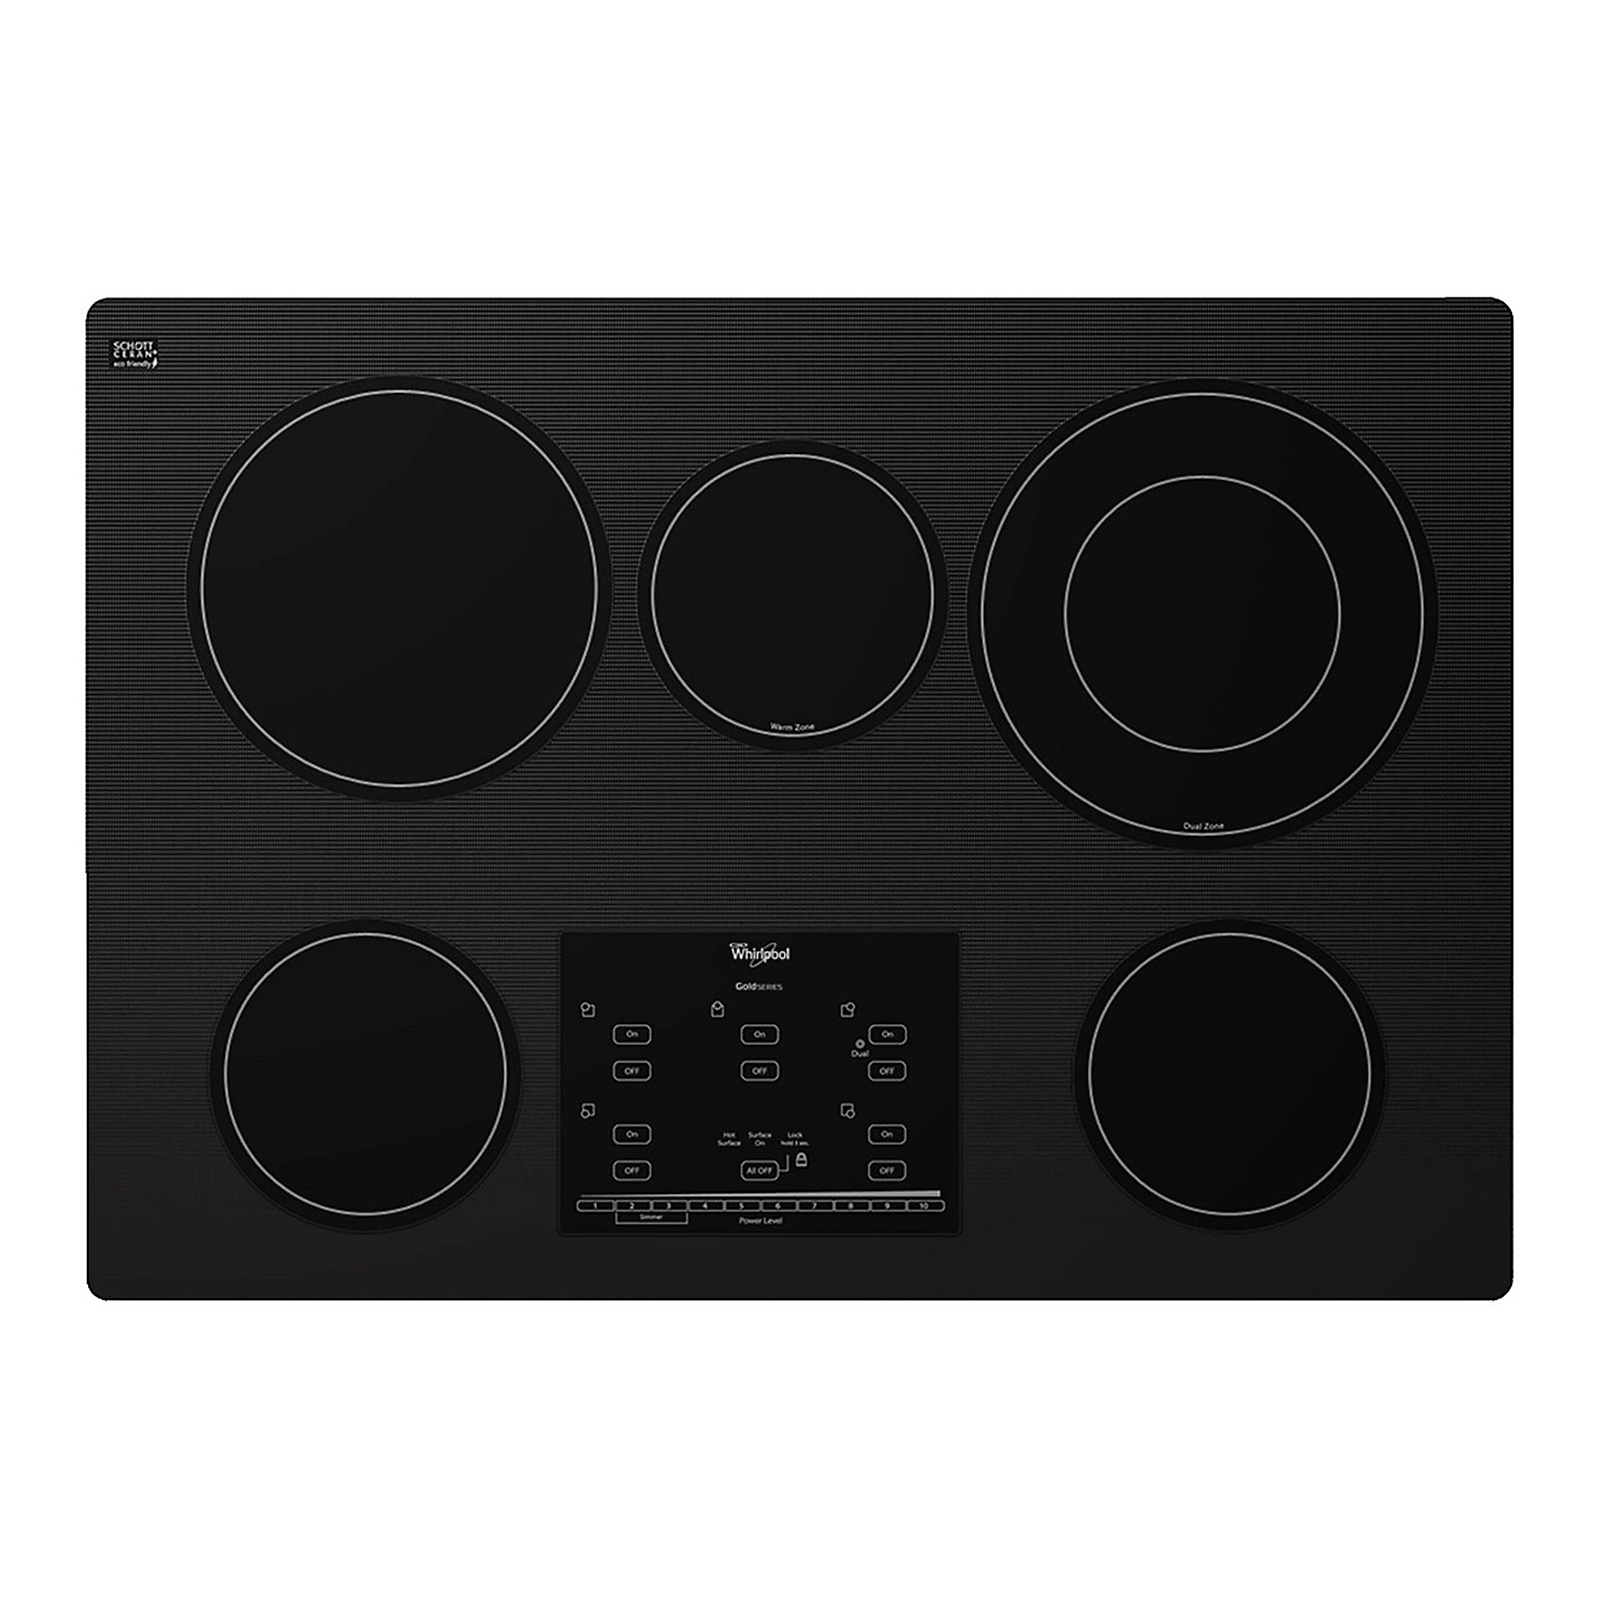 Whirlpool G9CE3065XB 30" Electric Cooktop, Black. 